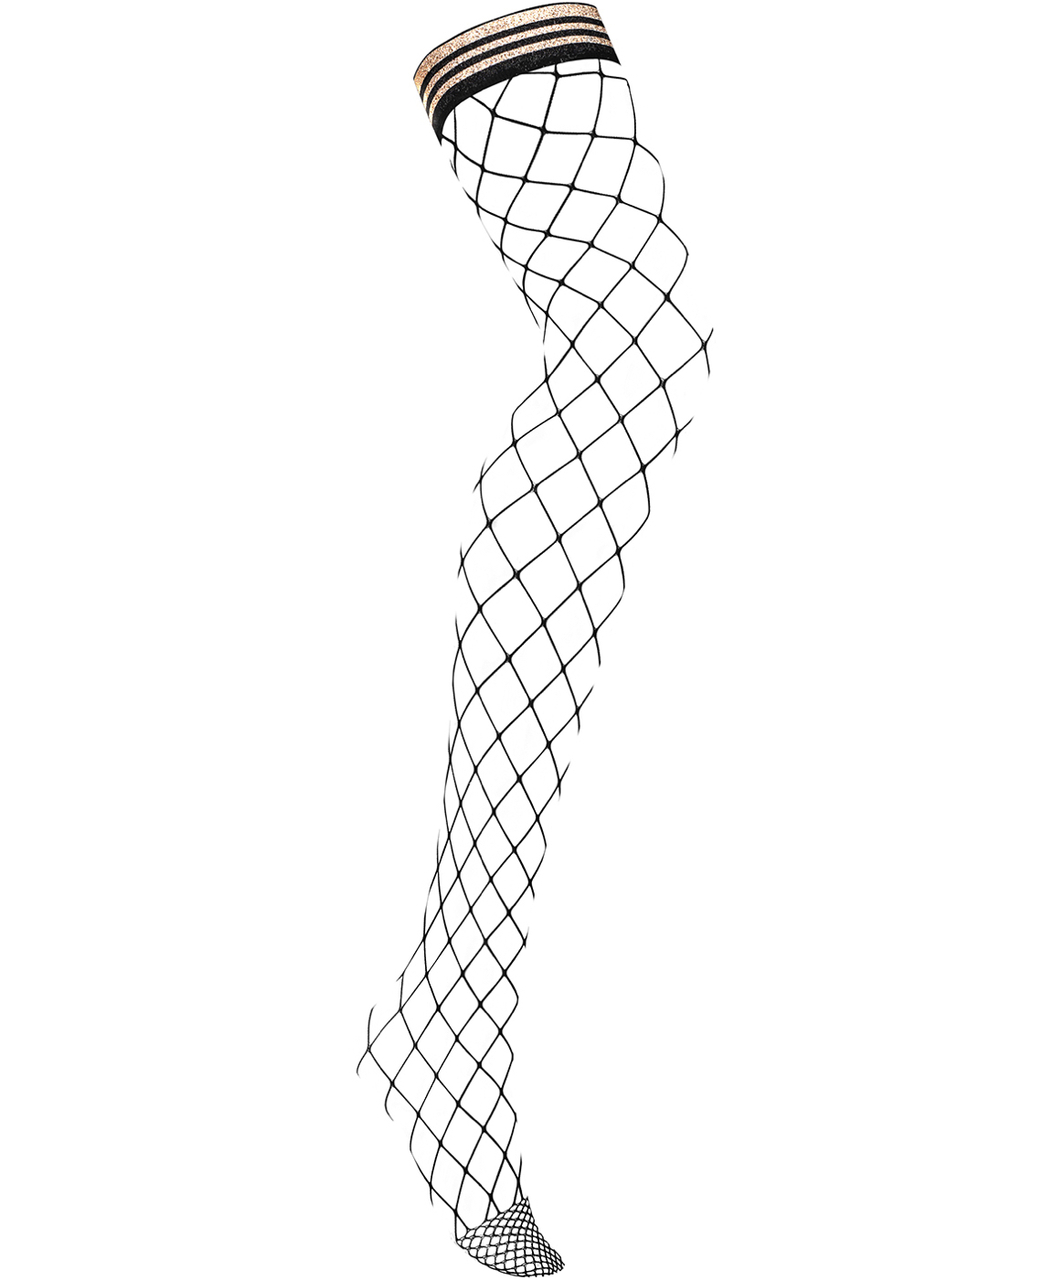 Obsessive black diamond net hold-up stockings with glittery welt